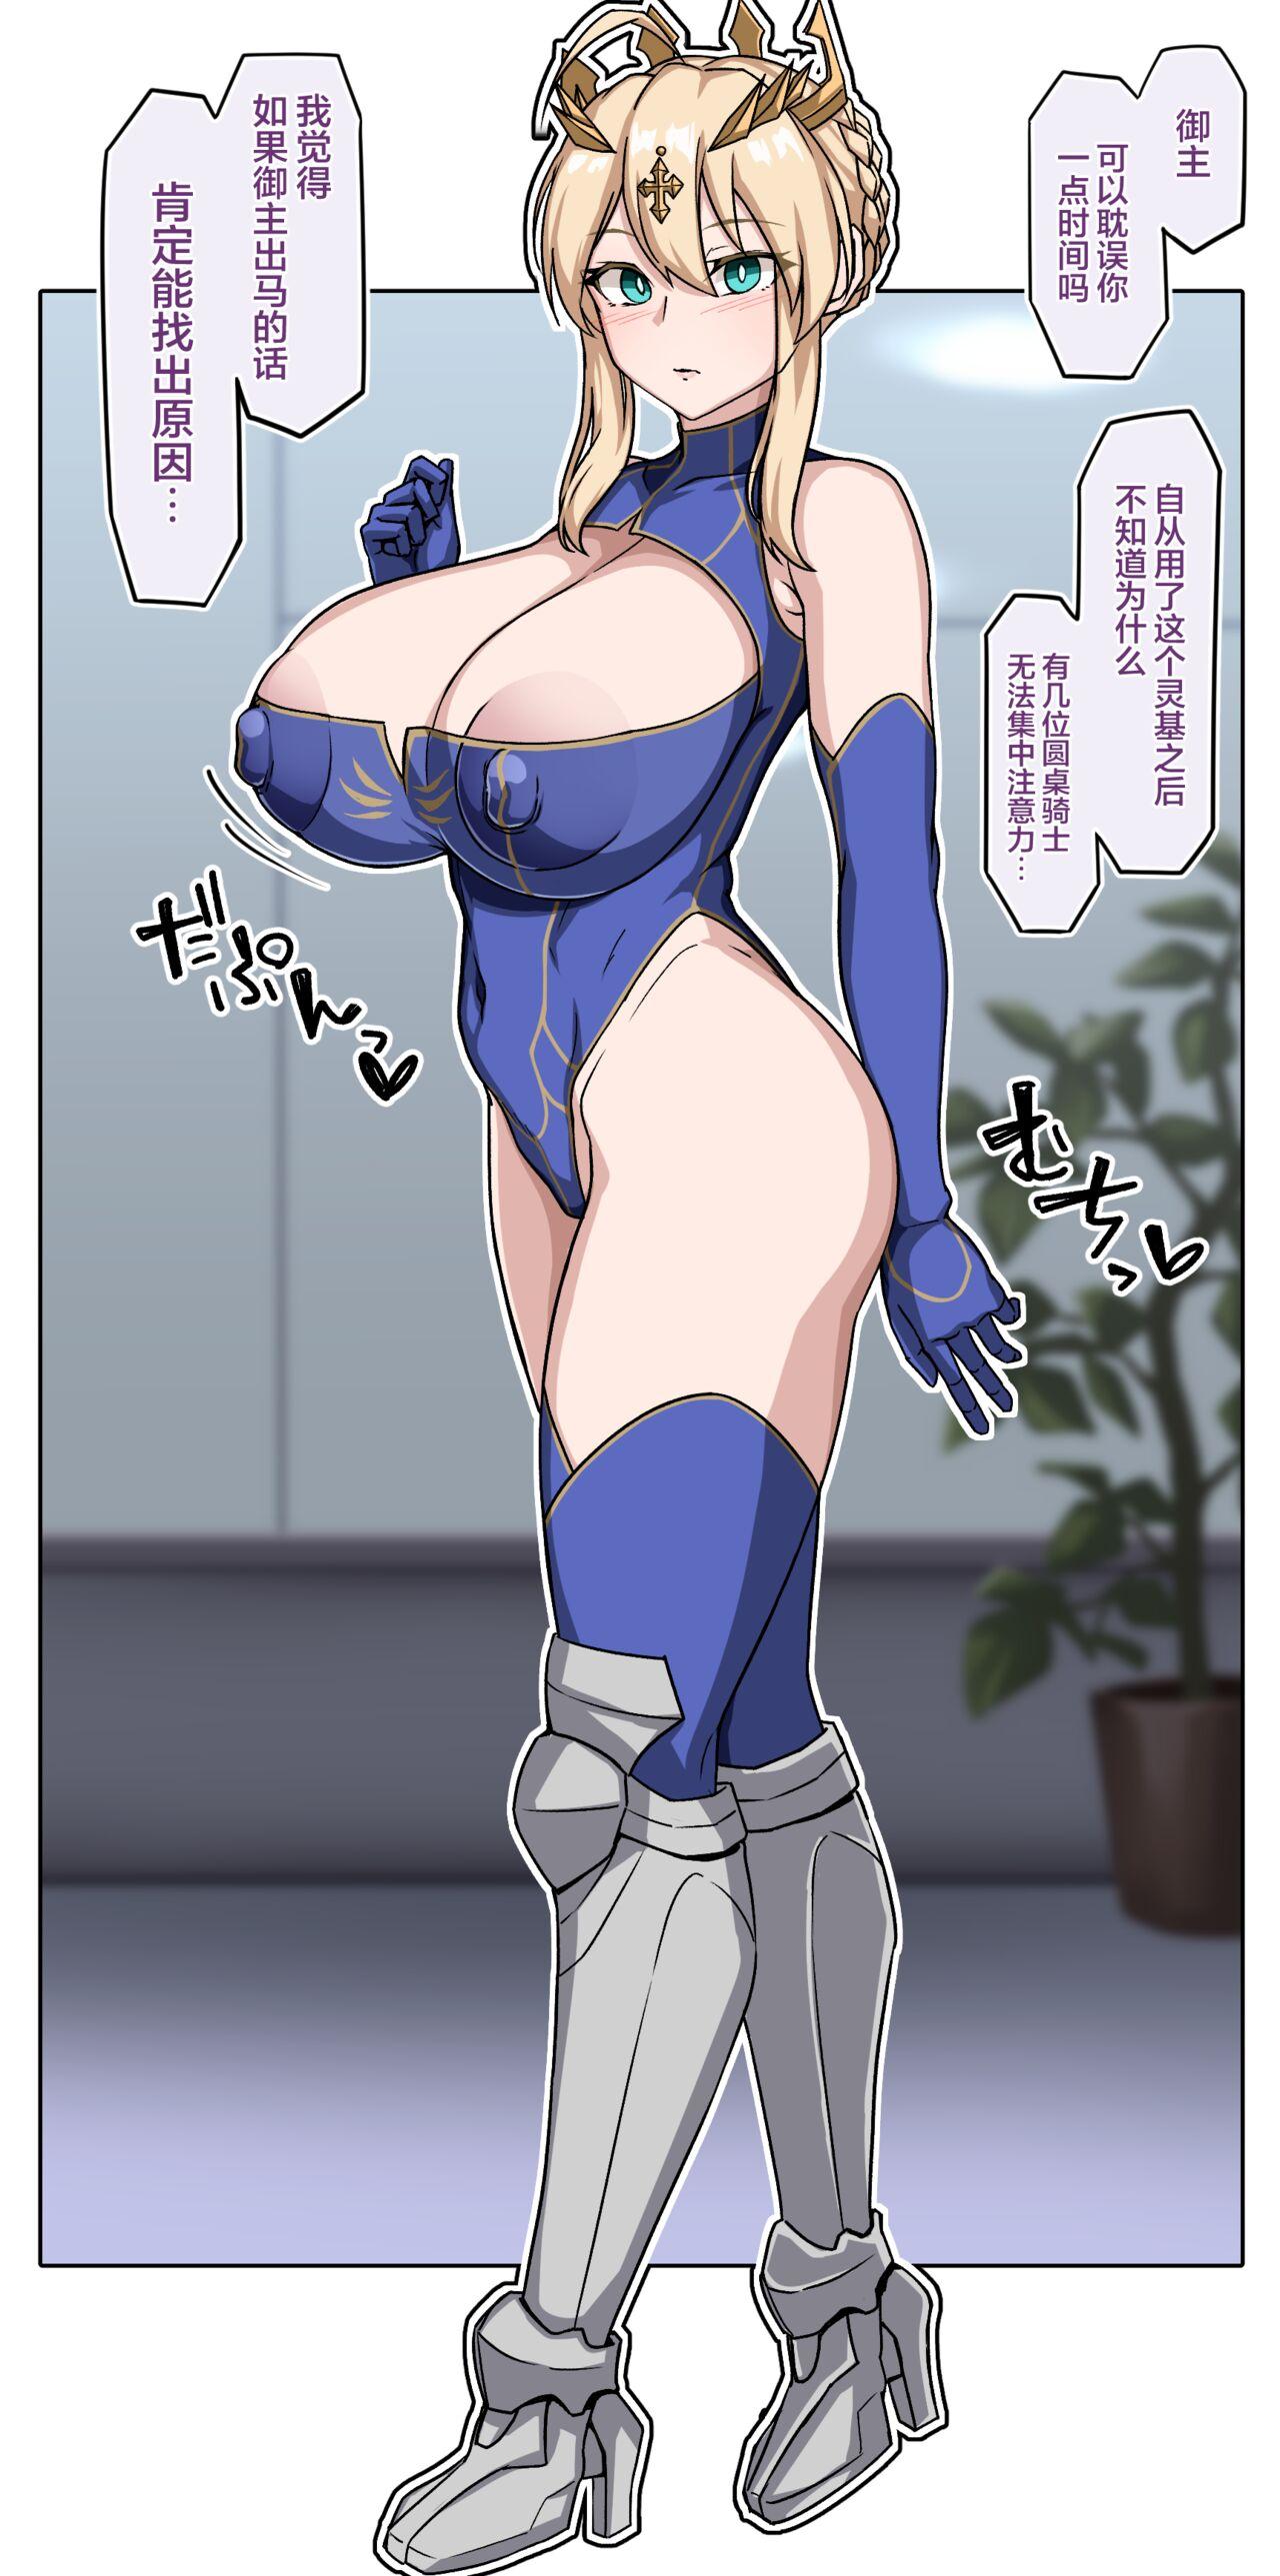 Leaked 乳上 - Fate grand order Fingering - Page 2